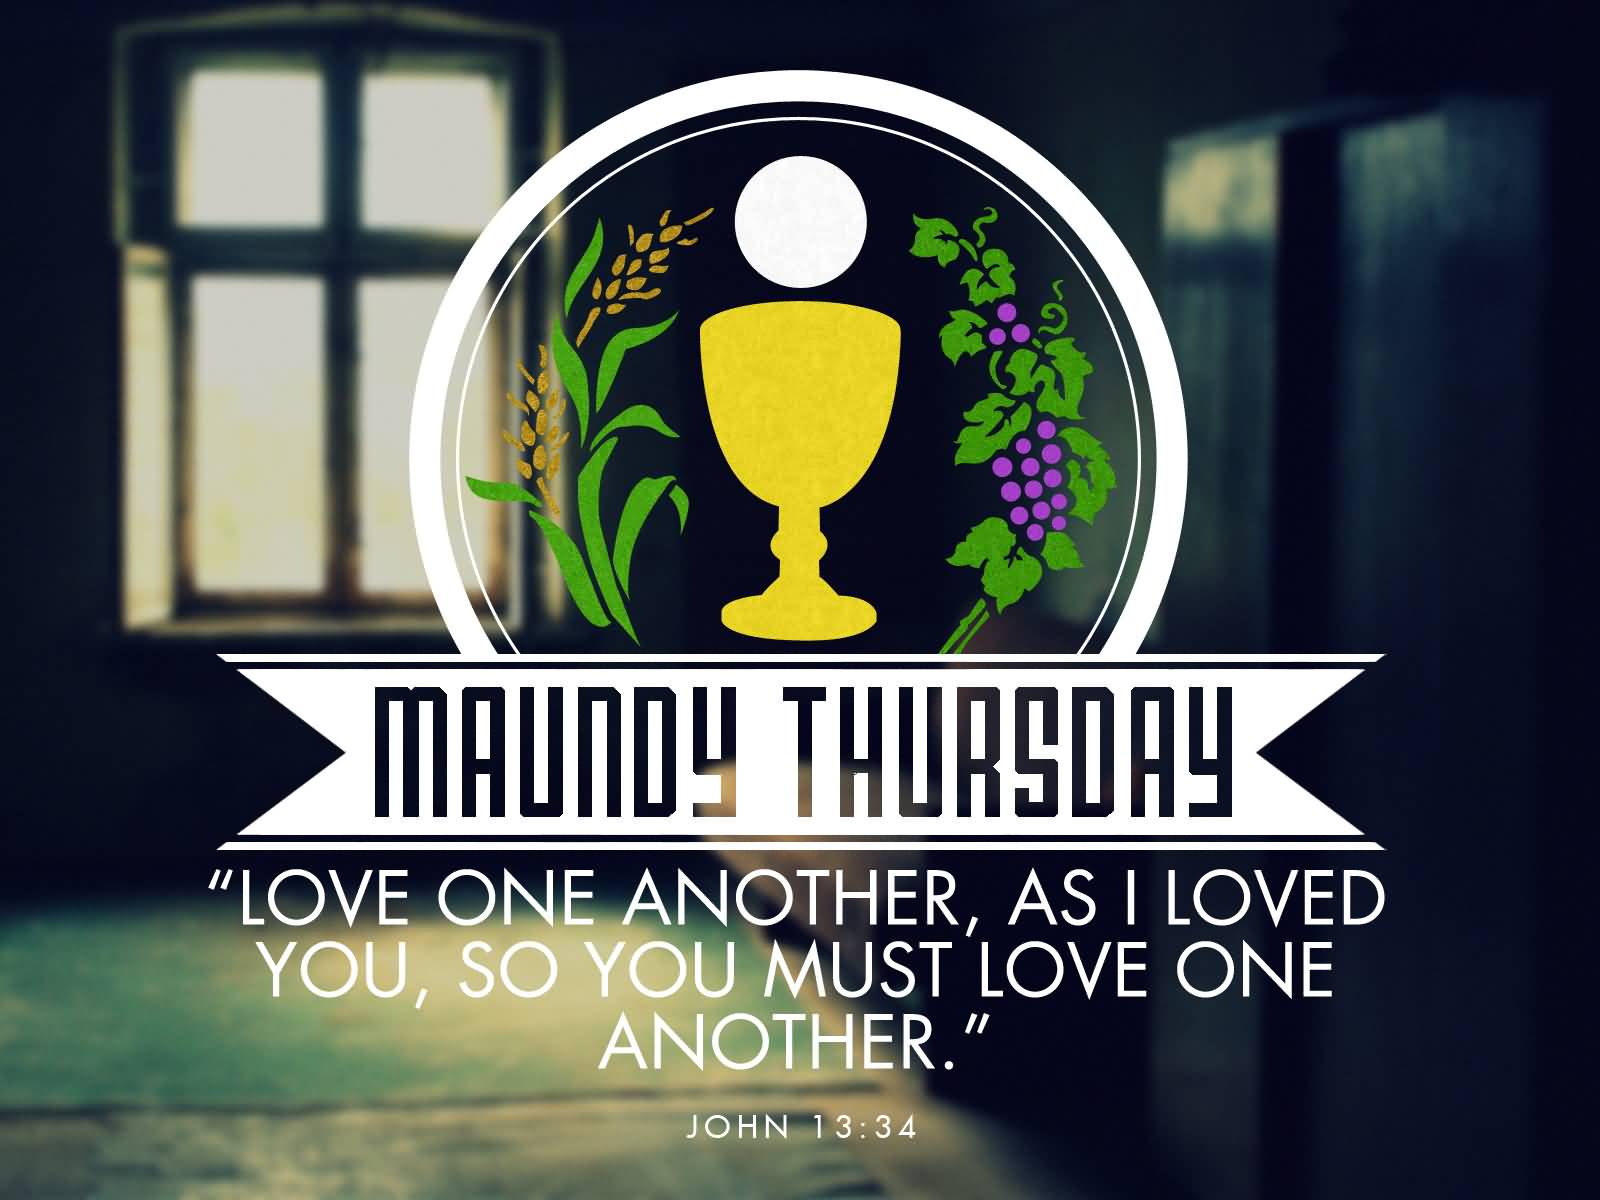 Maundy Thursday Love One Another, As I Loved You, So You Must Love One Another